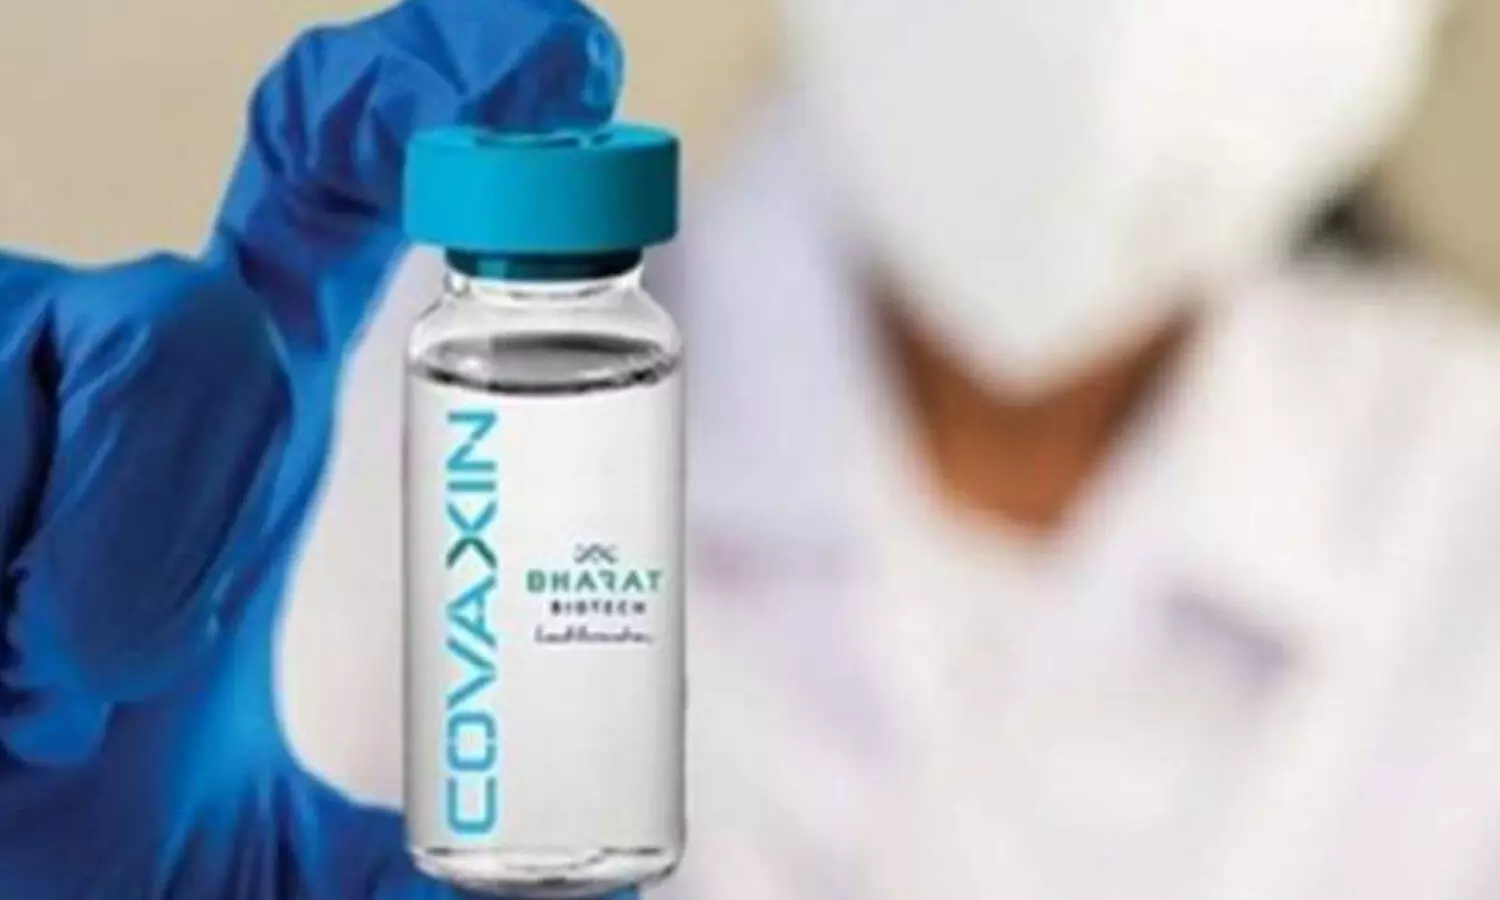 Covaxin gets approval for clinical trials for phase 2/3 on Children